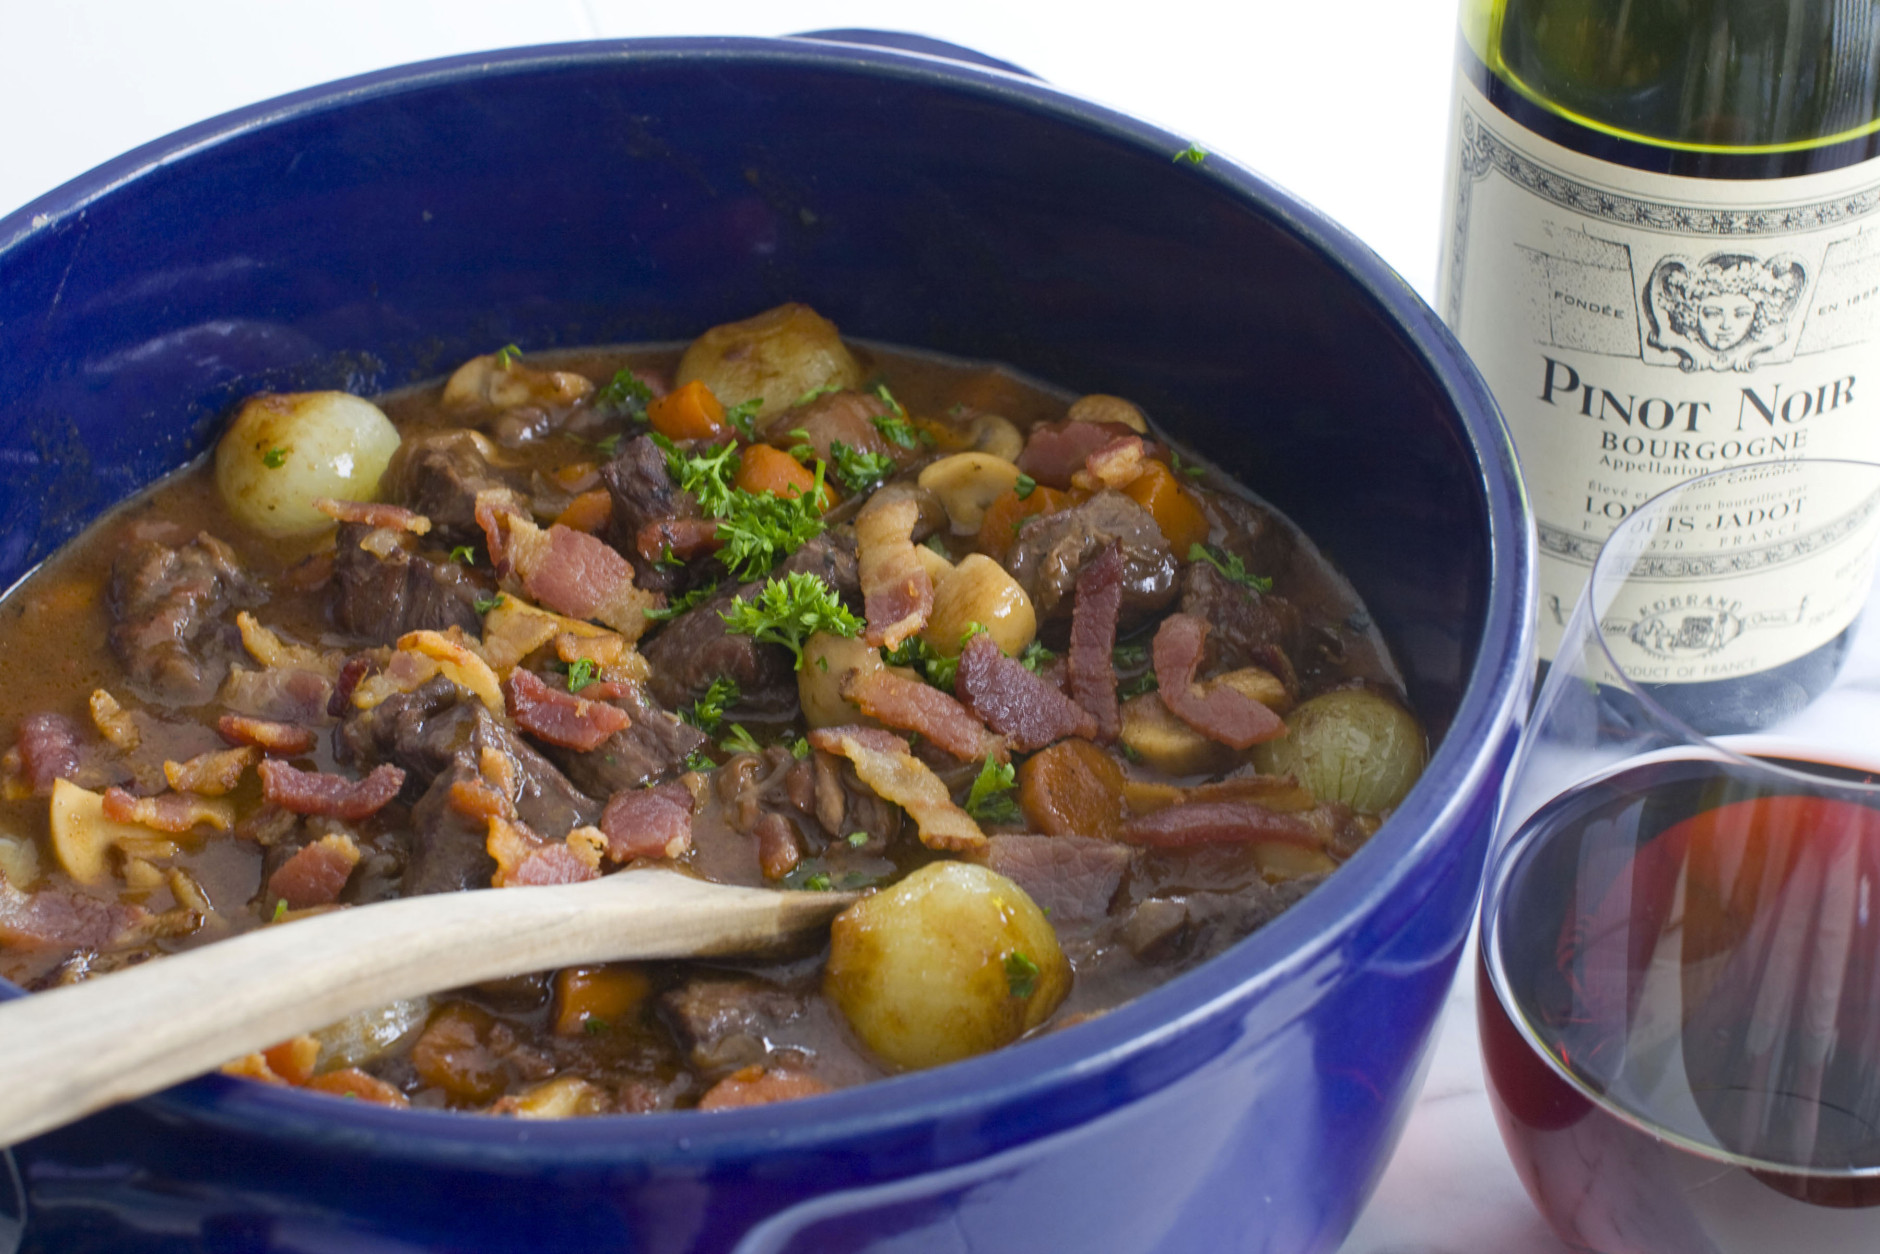 In this image taken on April 23, 2012, Julia Child's beef bourguignon recipe is paired with a pinot noir as seen in Concord, NH. (AP Photo/Matthew Mead)